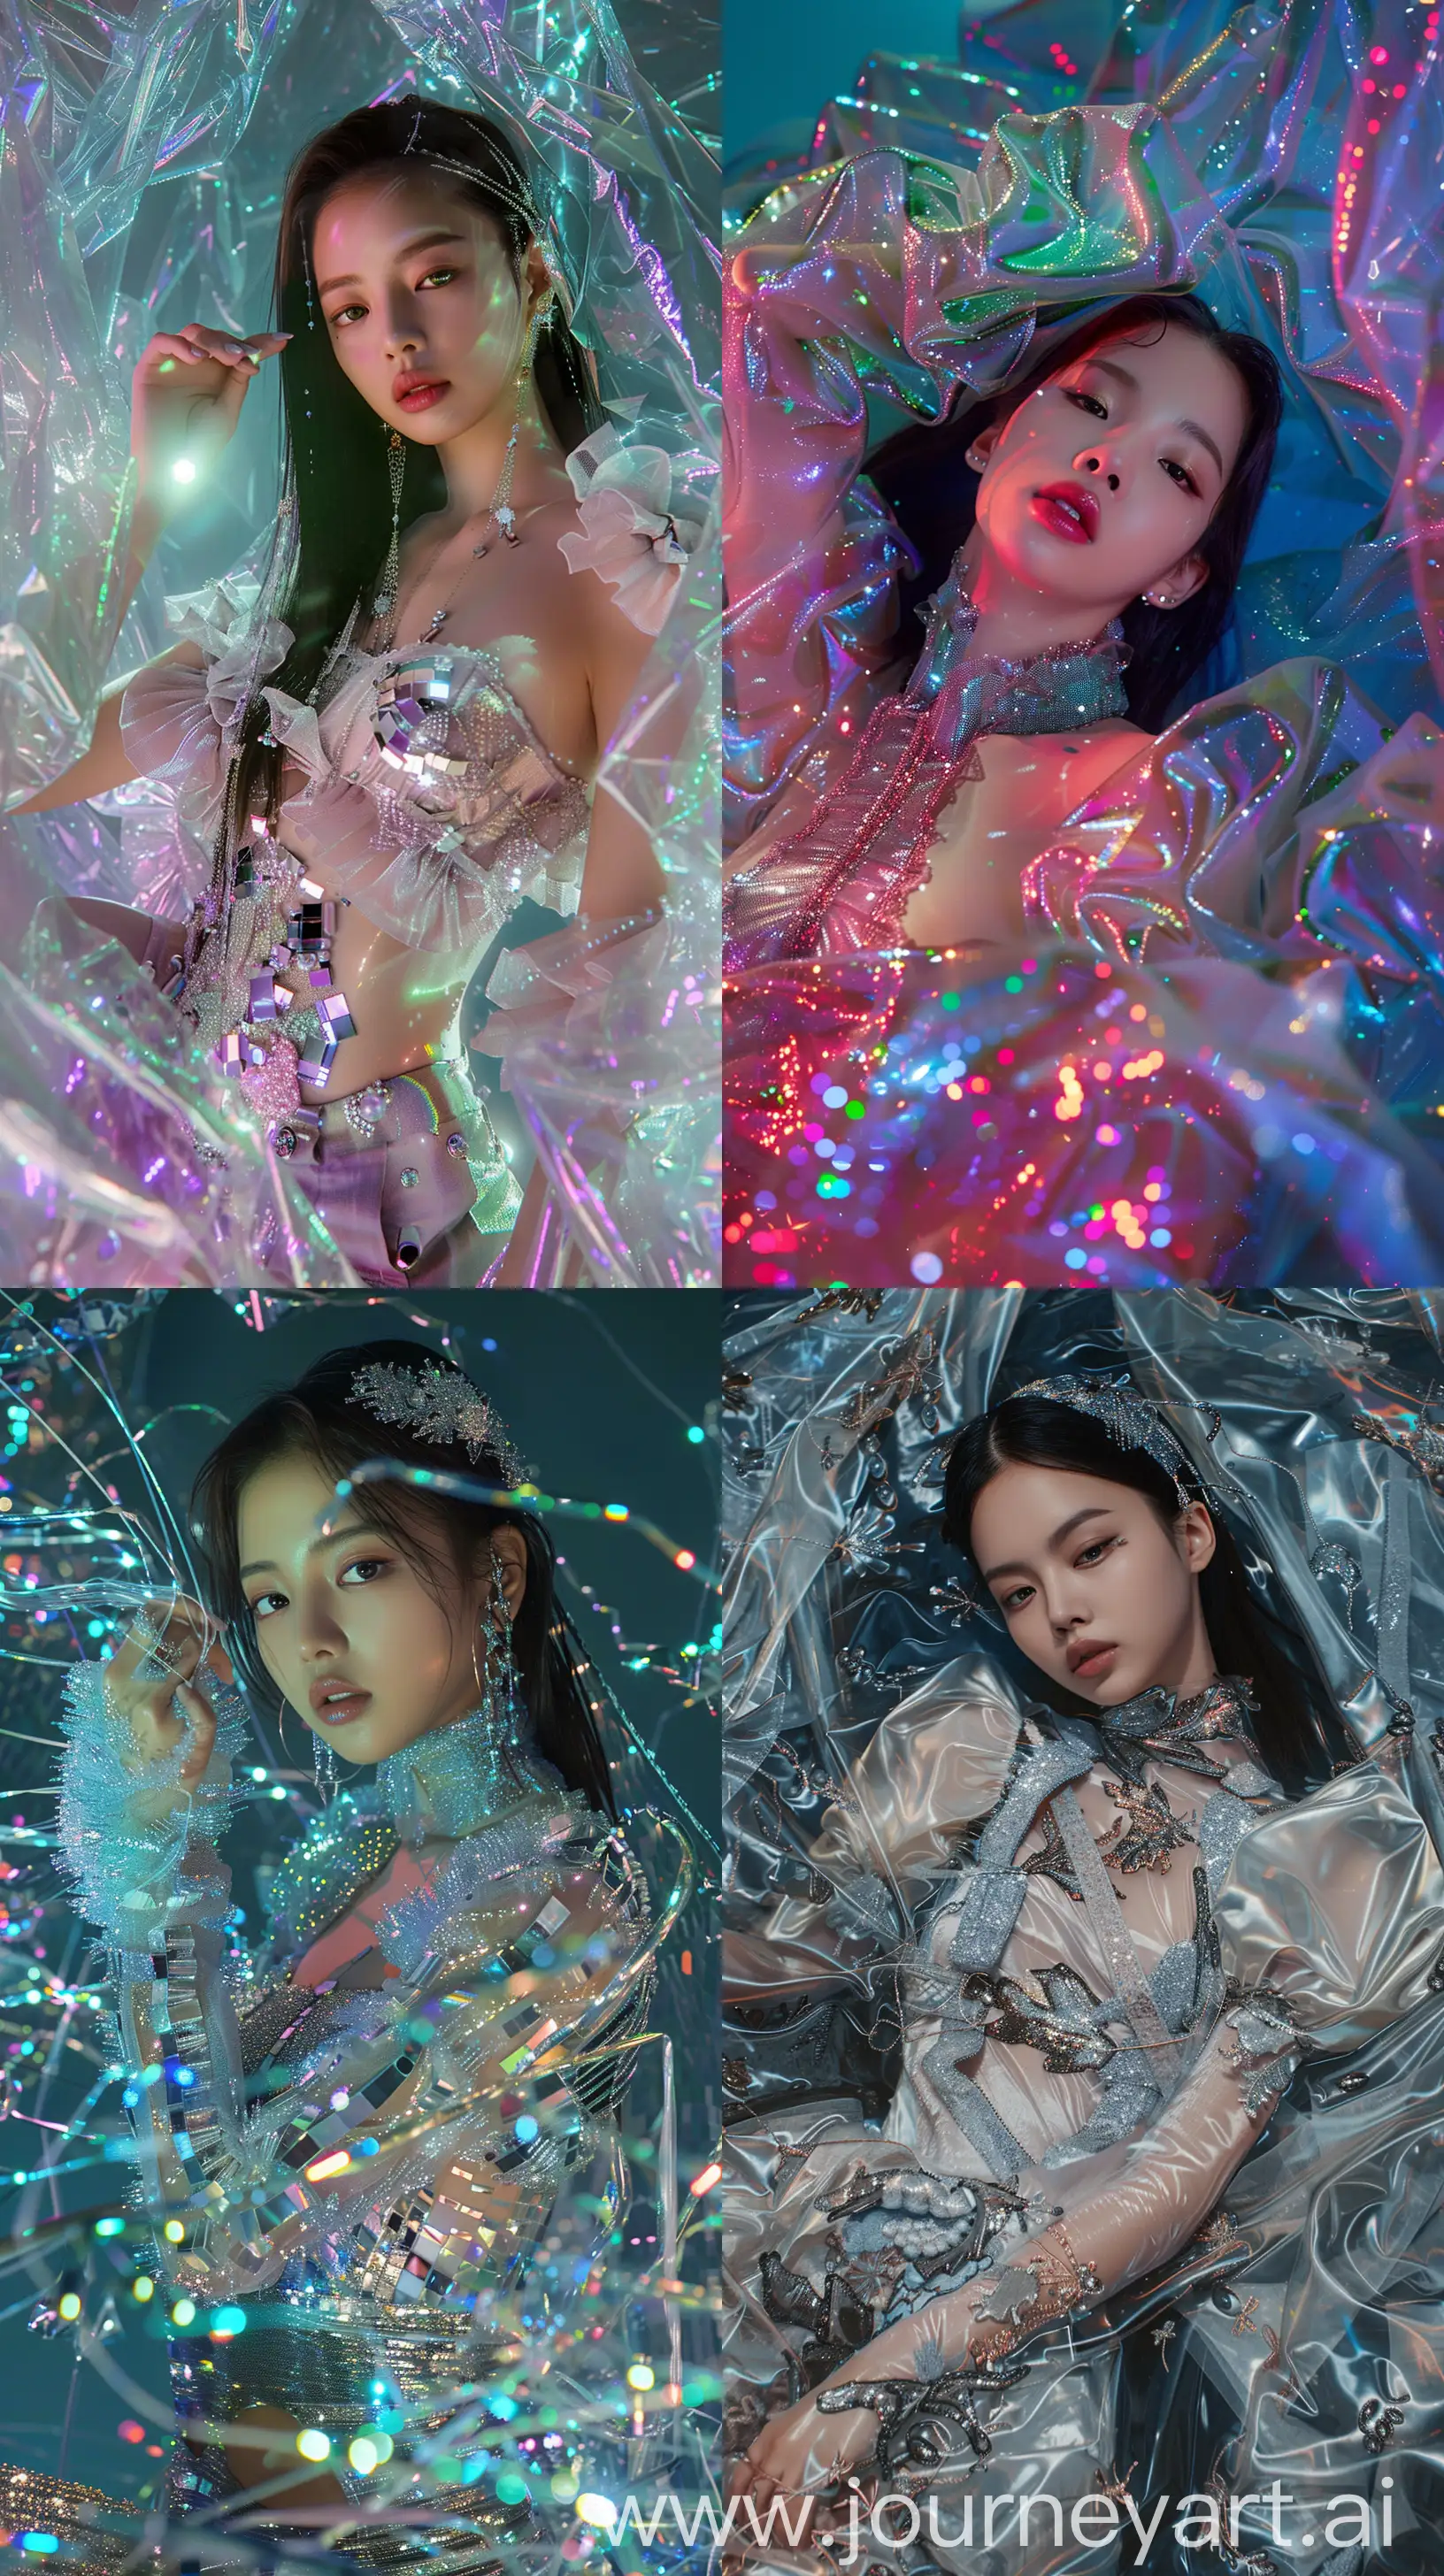 blackpink's jennie cover art style of  surreal matrix vastness  longshot reflective fabric fashion clothes designs overwrought perfect flawless layered cinematic lighting detailed textures natural fabrics unique styles made with mirror pieces and embroidered silk reflective, plastics blanket her body, nocturnal scene --ar 9:16